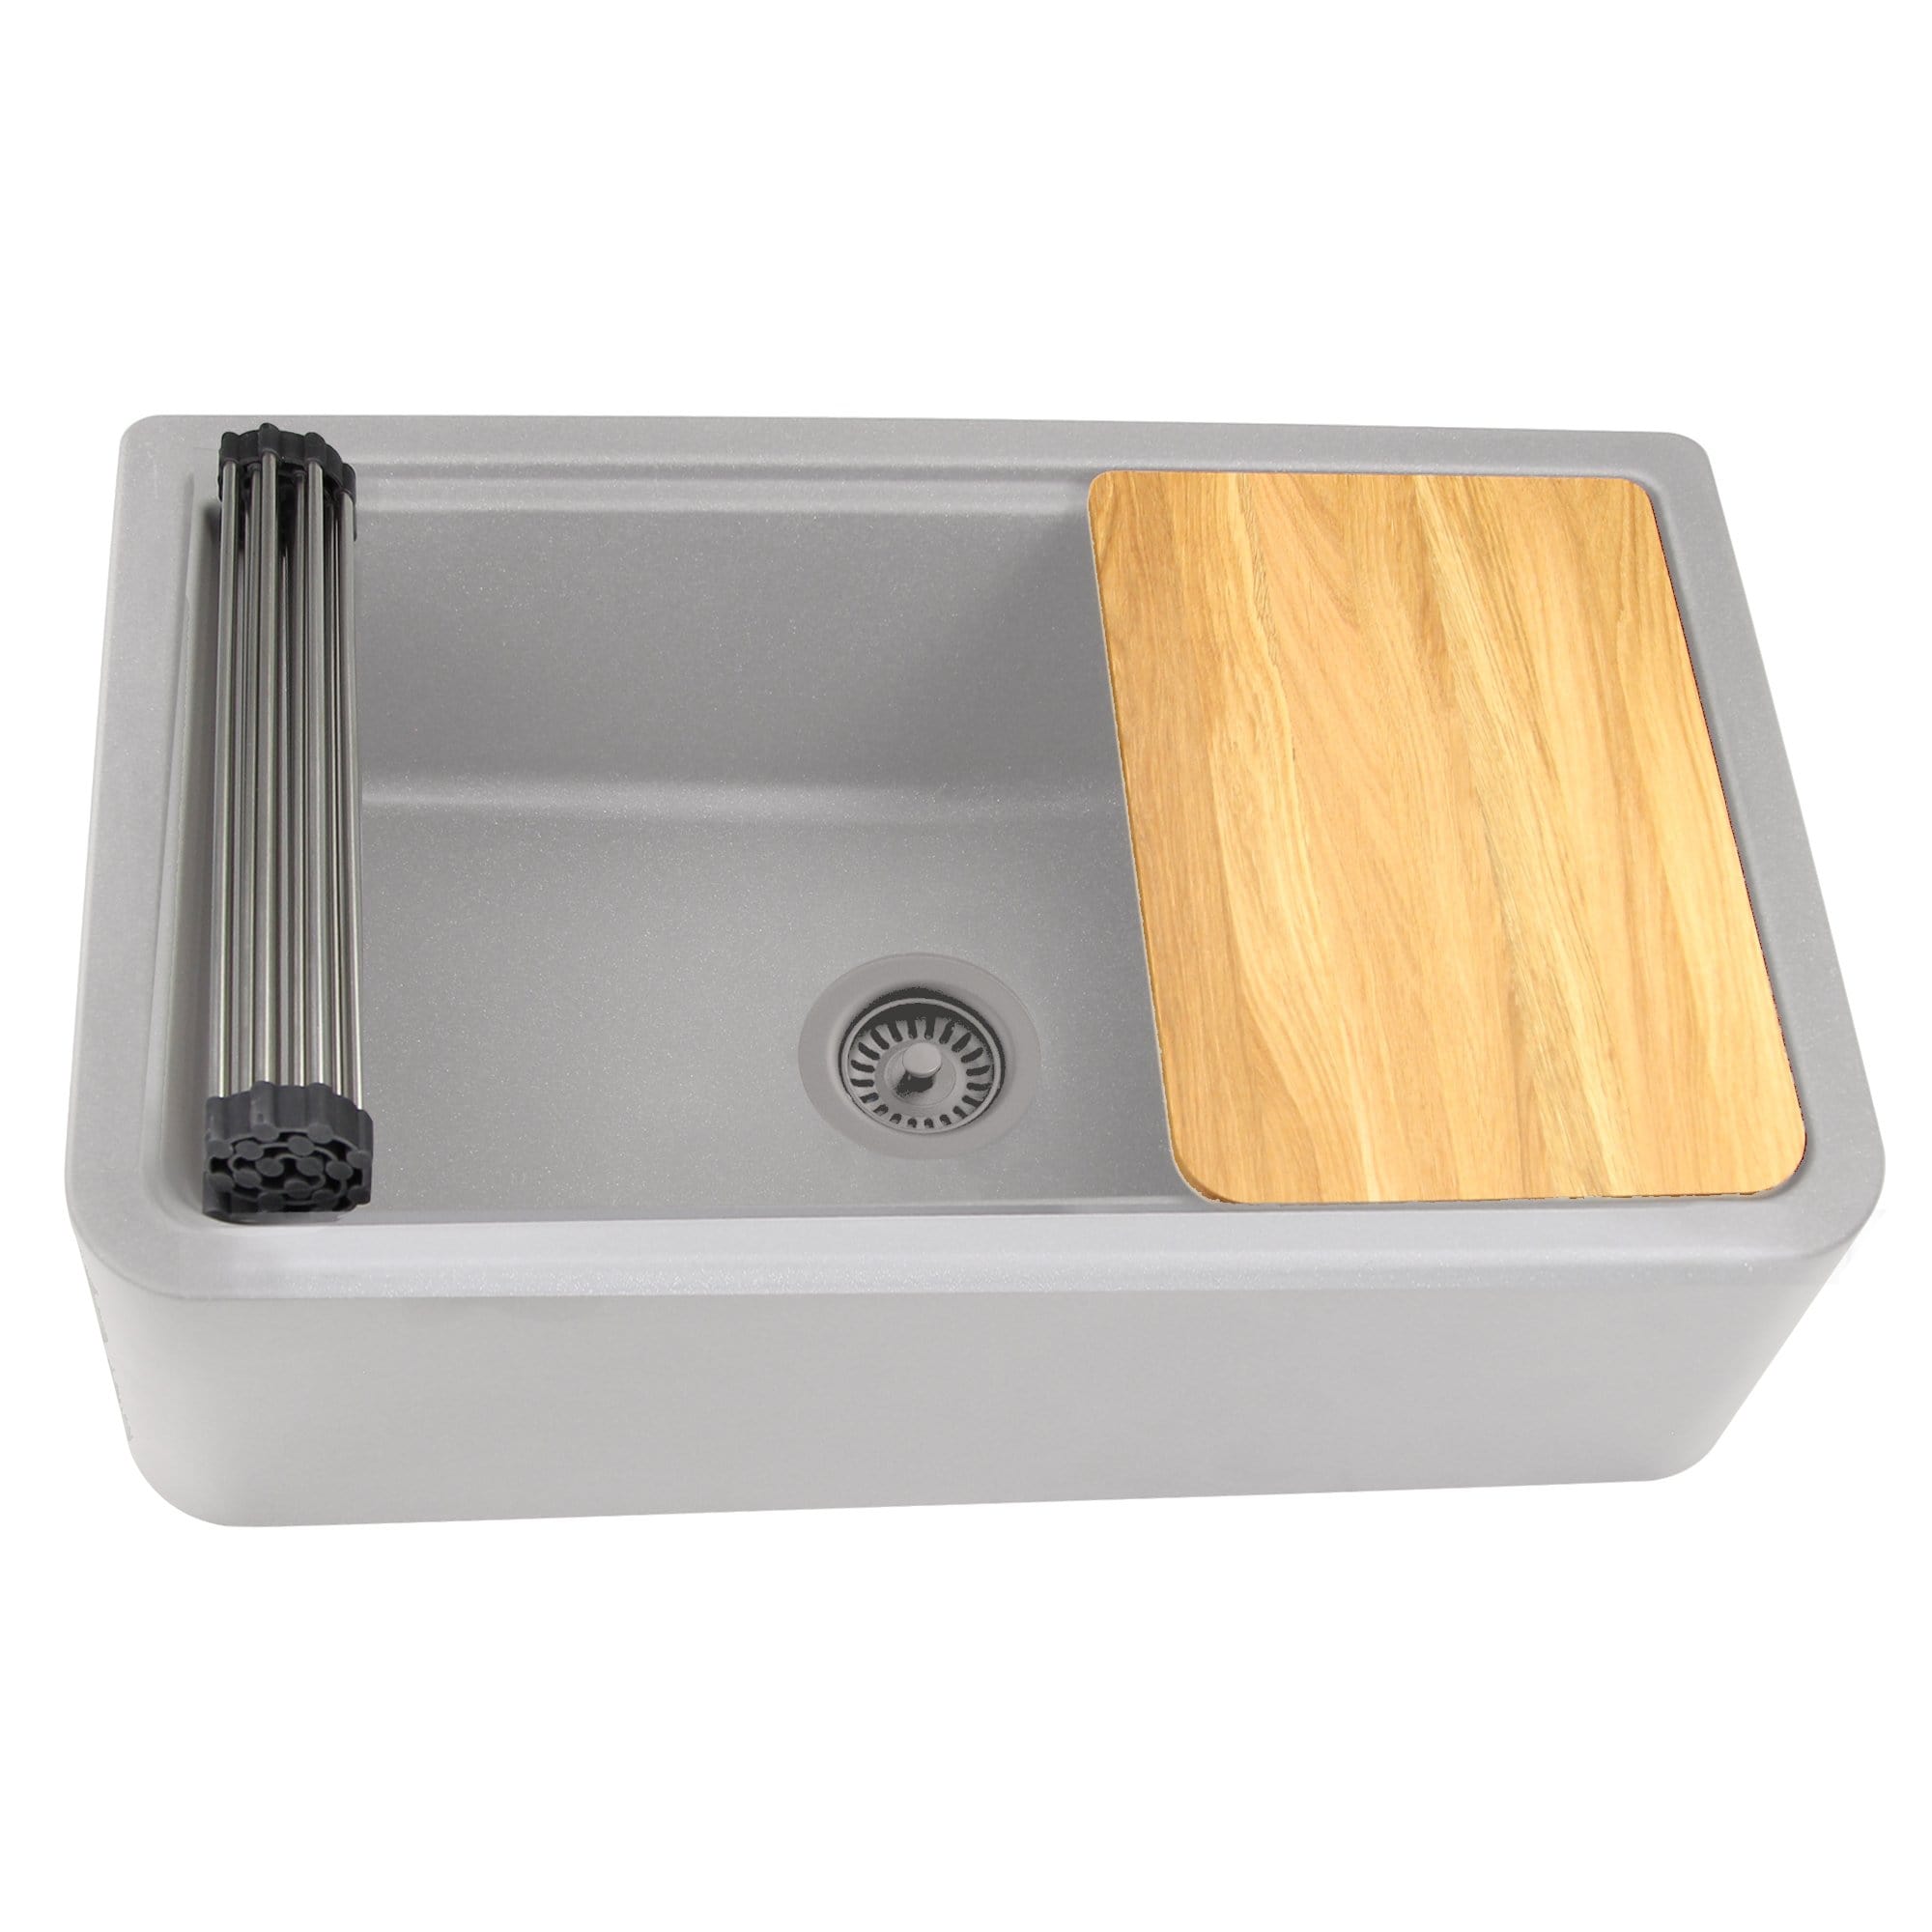 Nantucket 33" Reversible Workstation Granite Composite Apron Sink with Accessory Pack - PR3320-APS-G